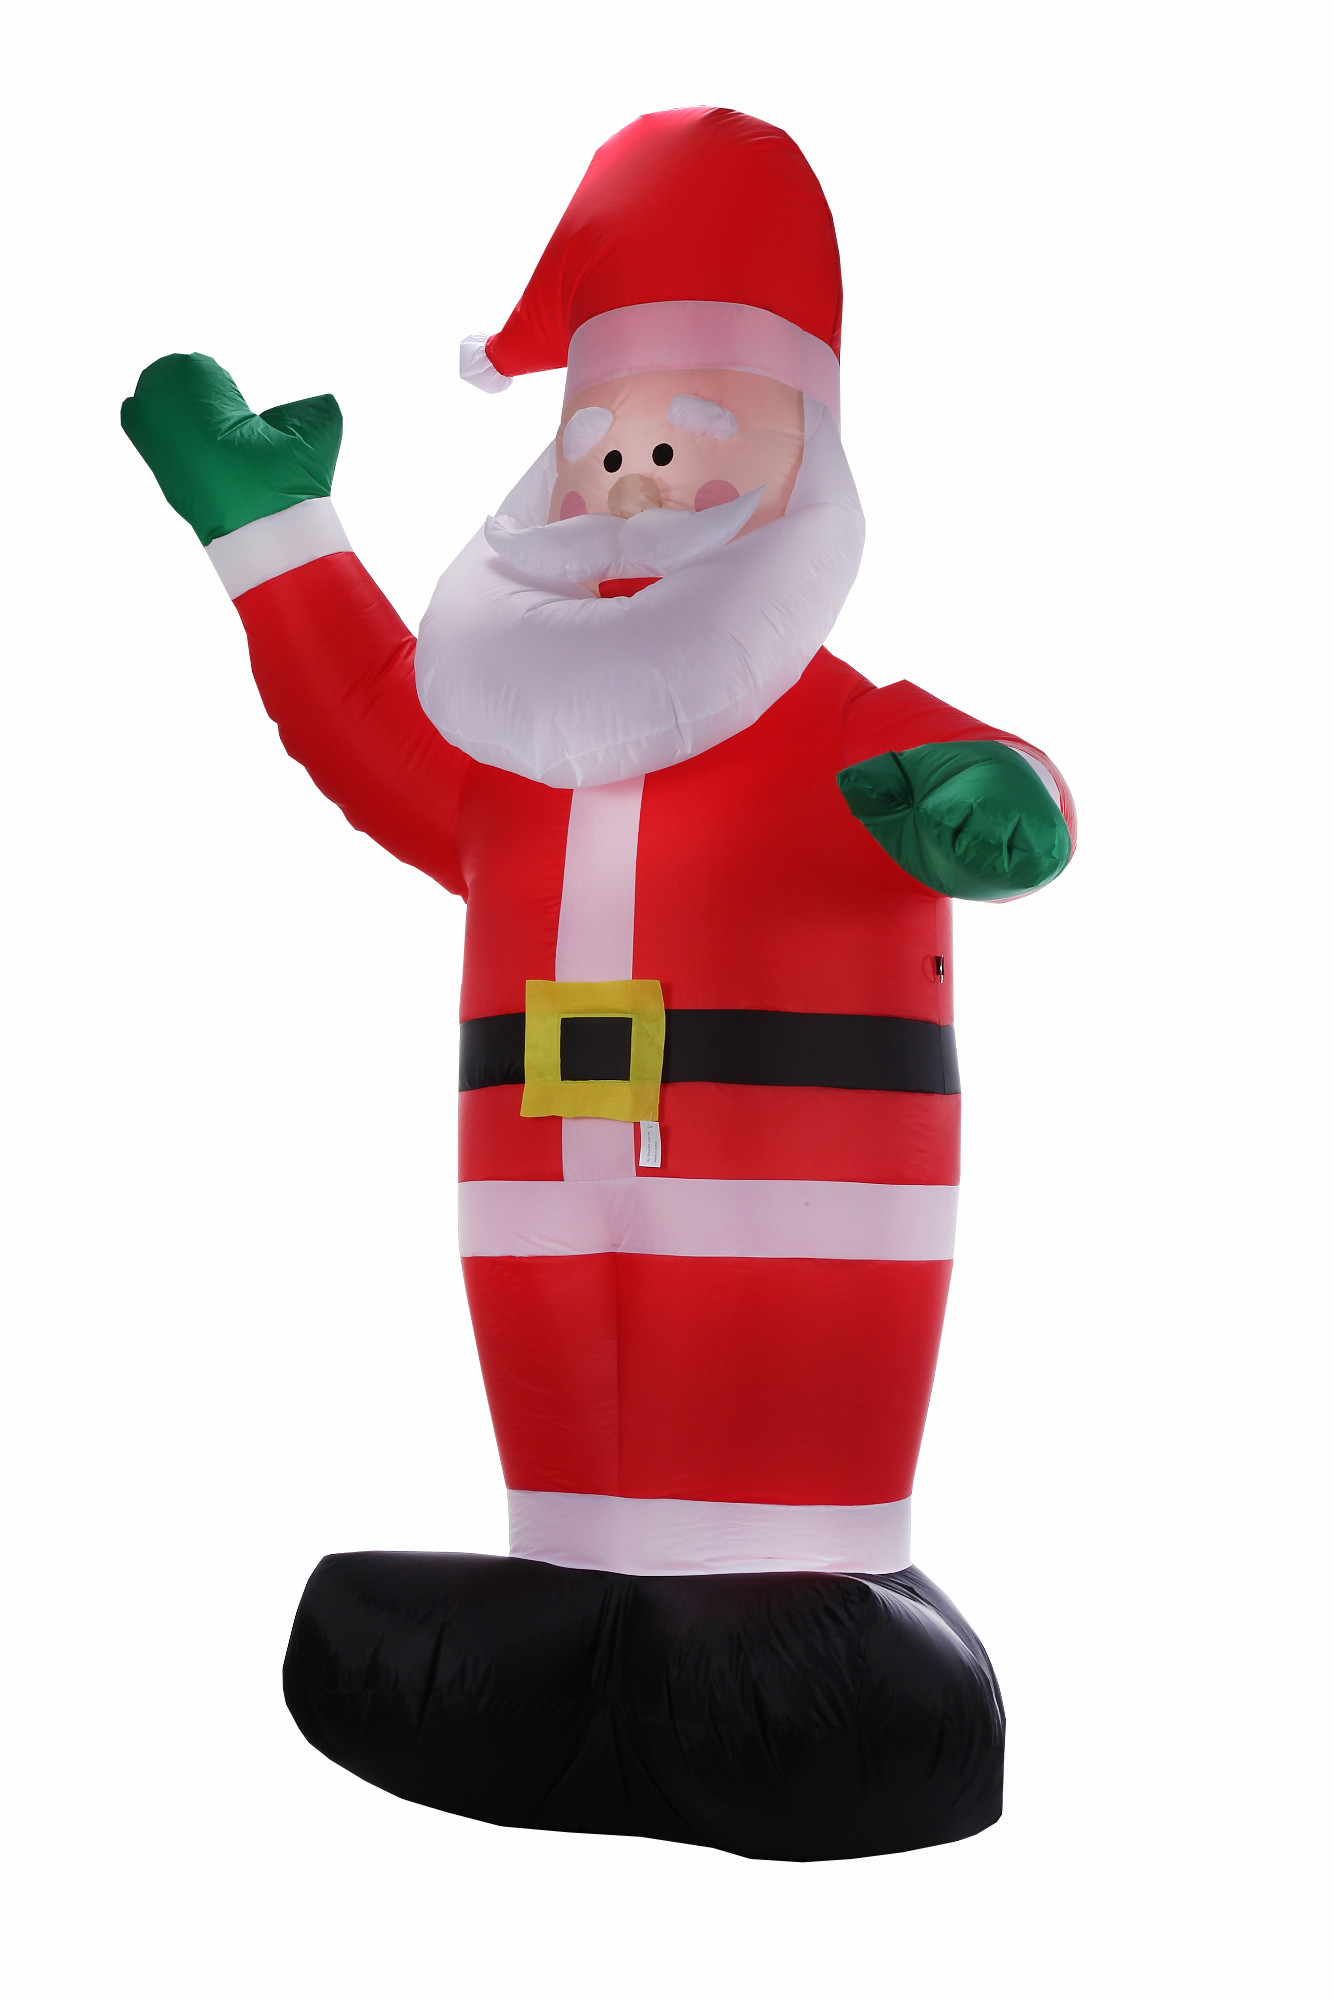 Outdoor Christmas Inflatables
 Homegear 8 ft Christmas Inflatable Santa Claus Air Blown